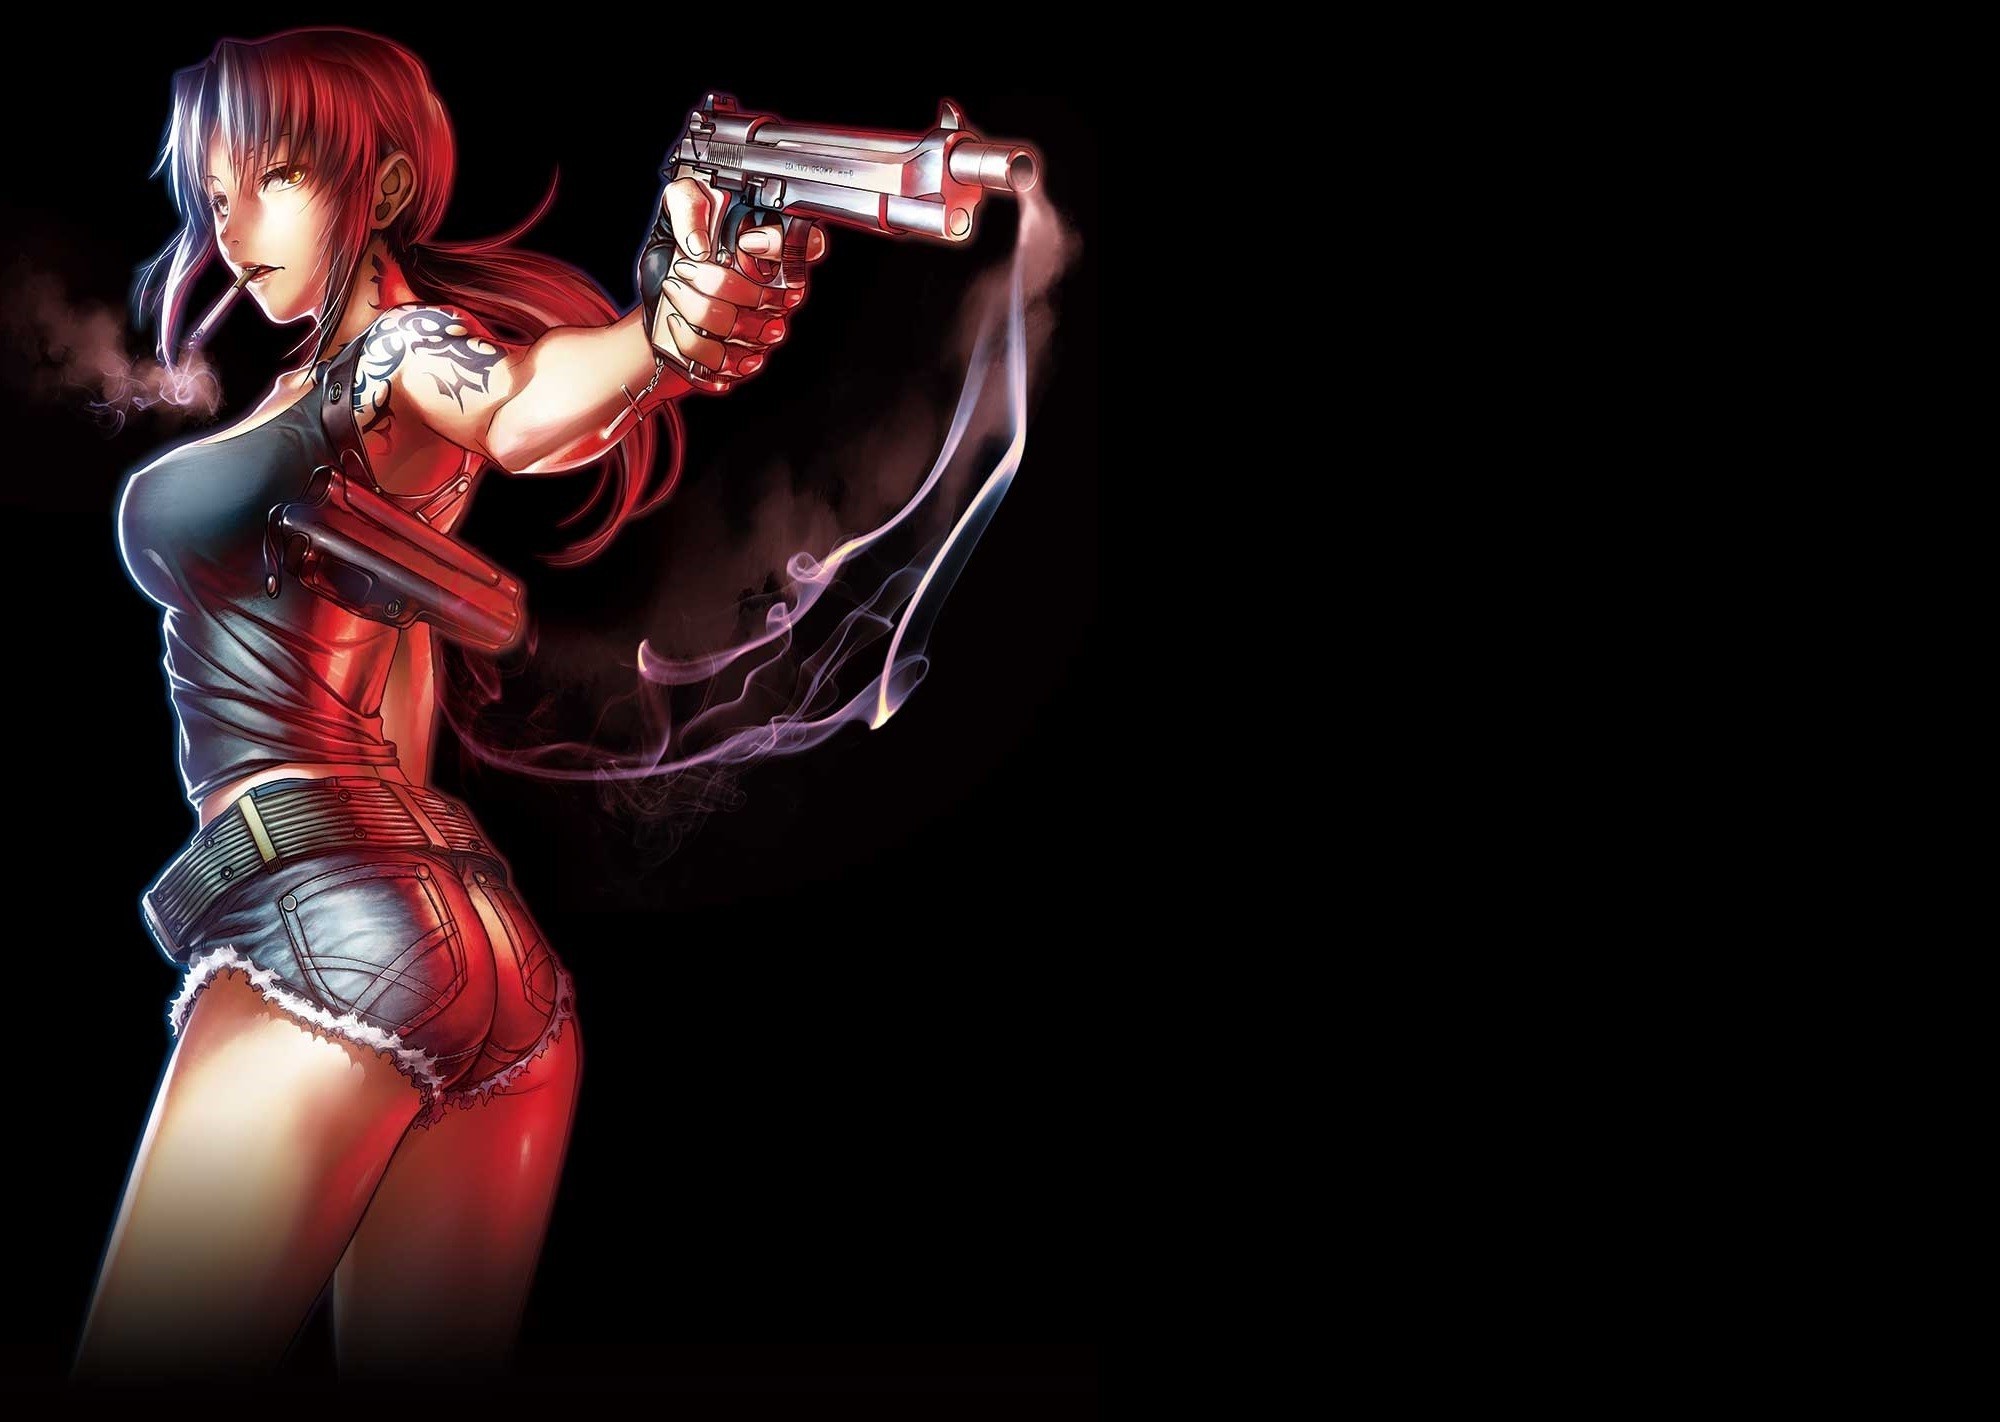 Anime Girls Anime Black Lagoon Revy Wallpapers Hd Desktop And Mobile Backgrounds